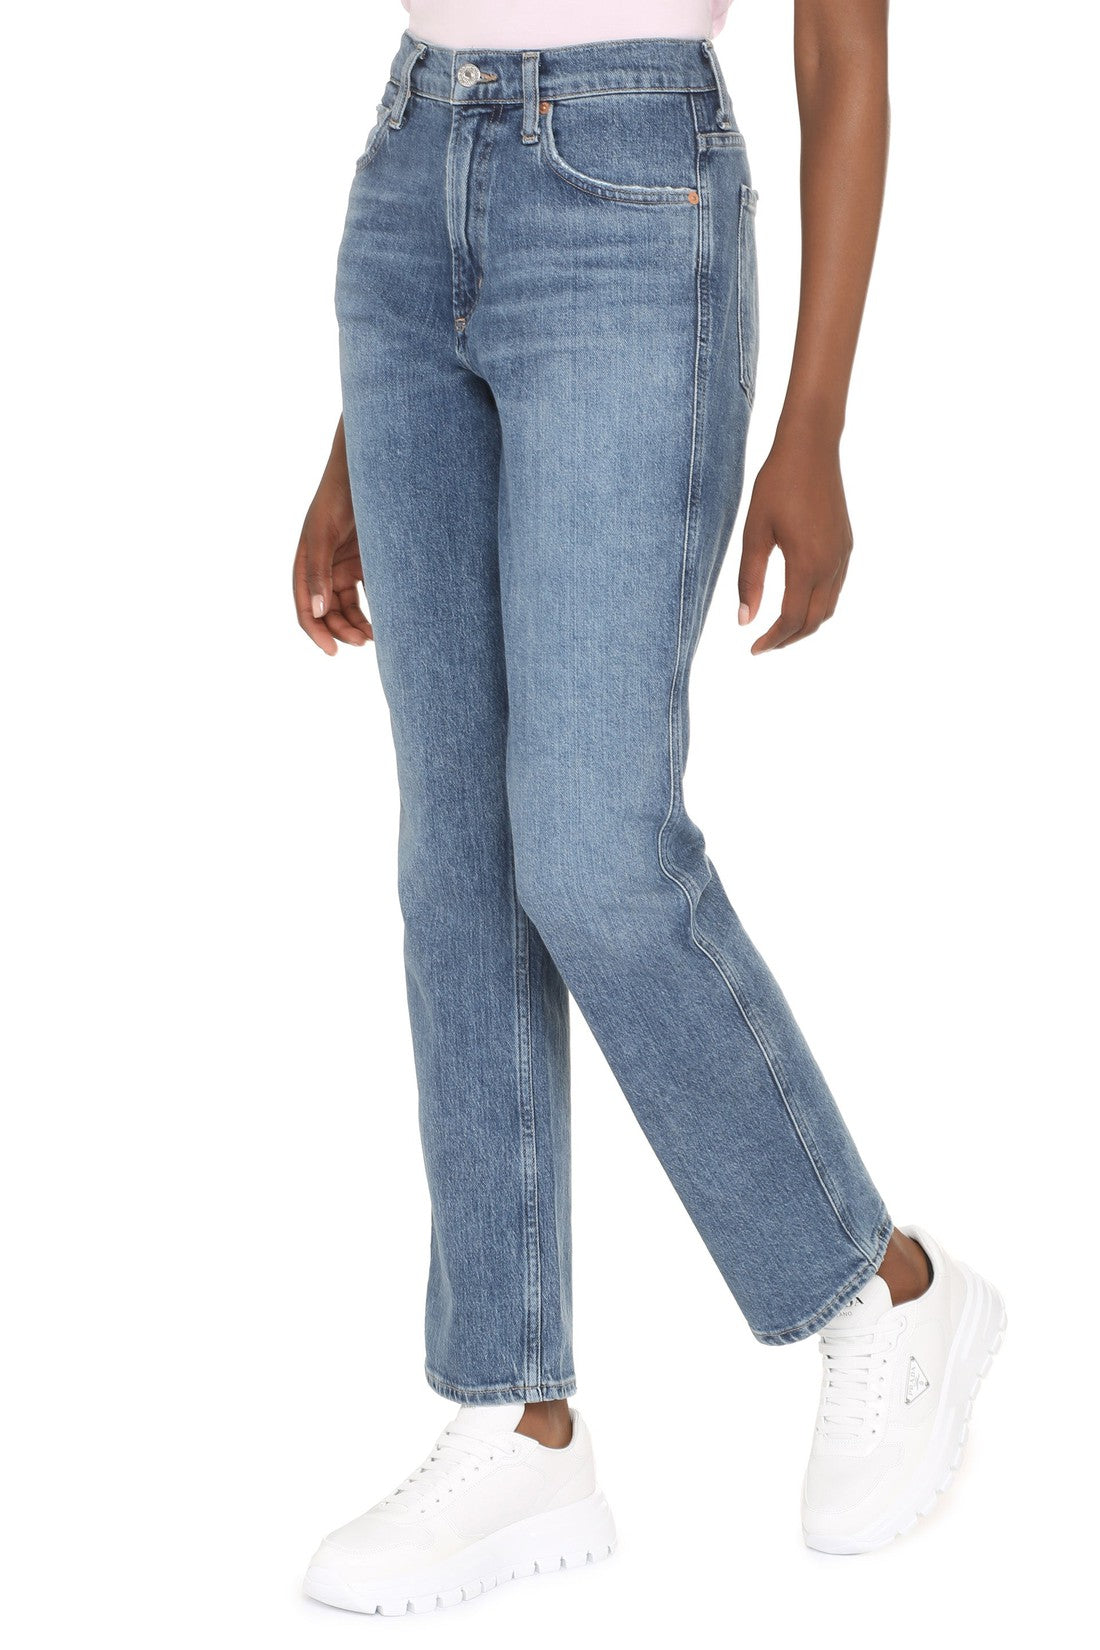 Citizens of Humanity-OUTLET-SALE-Daphne stovepipe jeans-ARCHIVIST